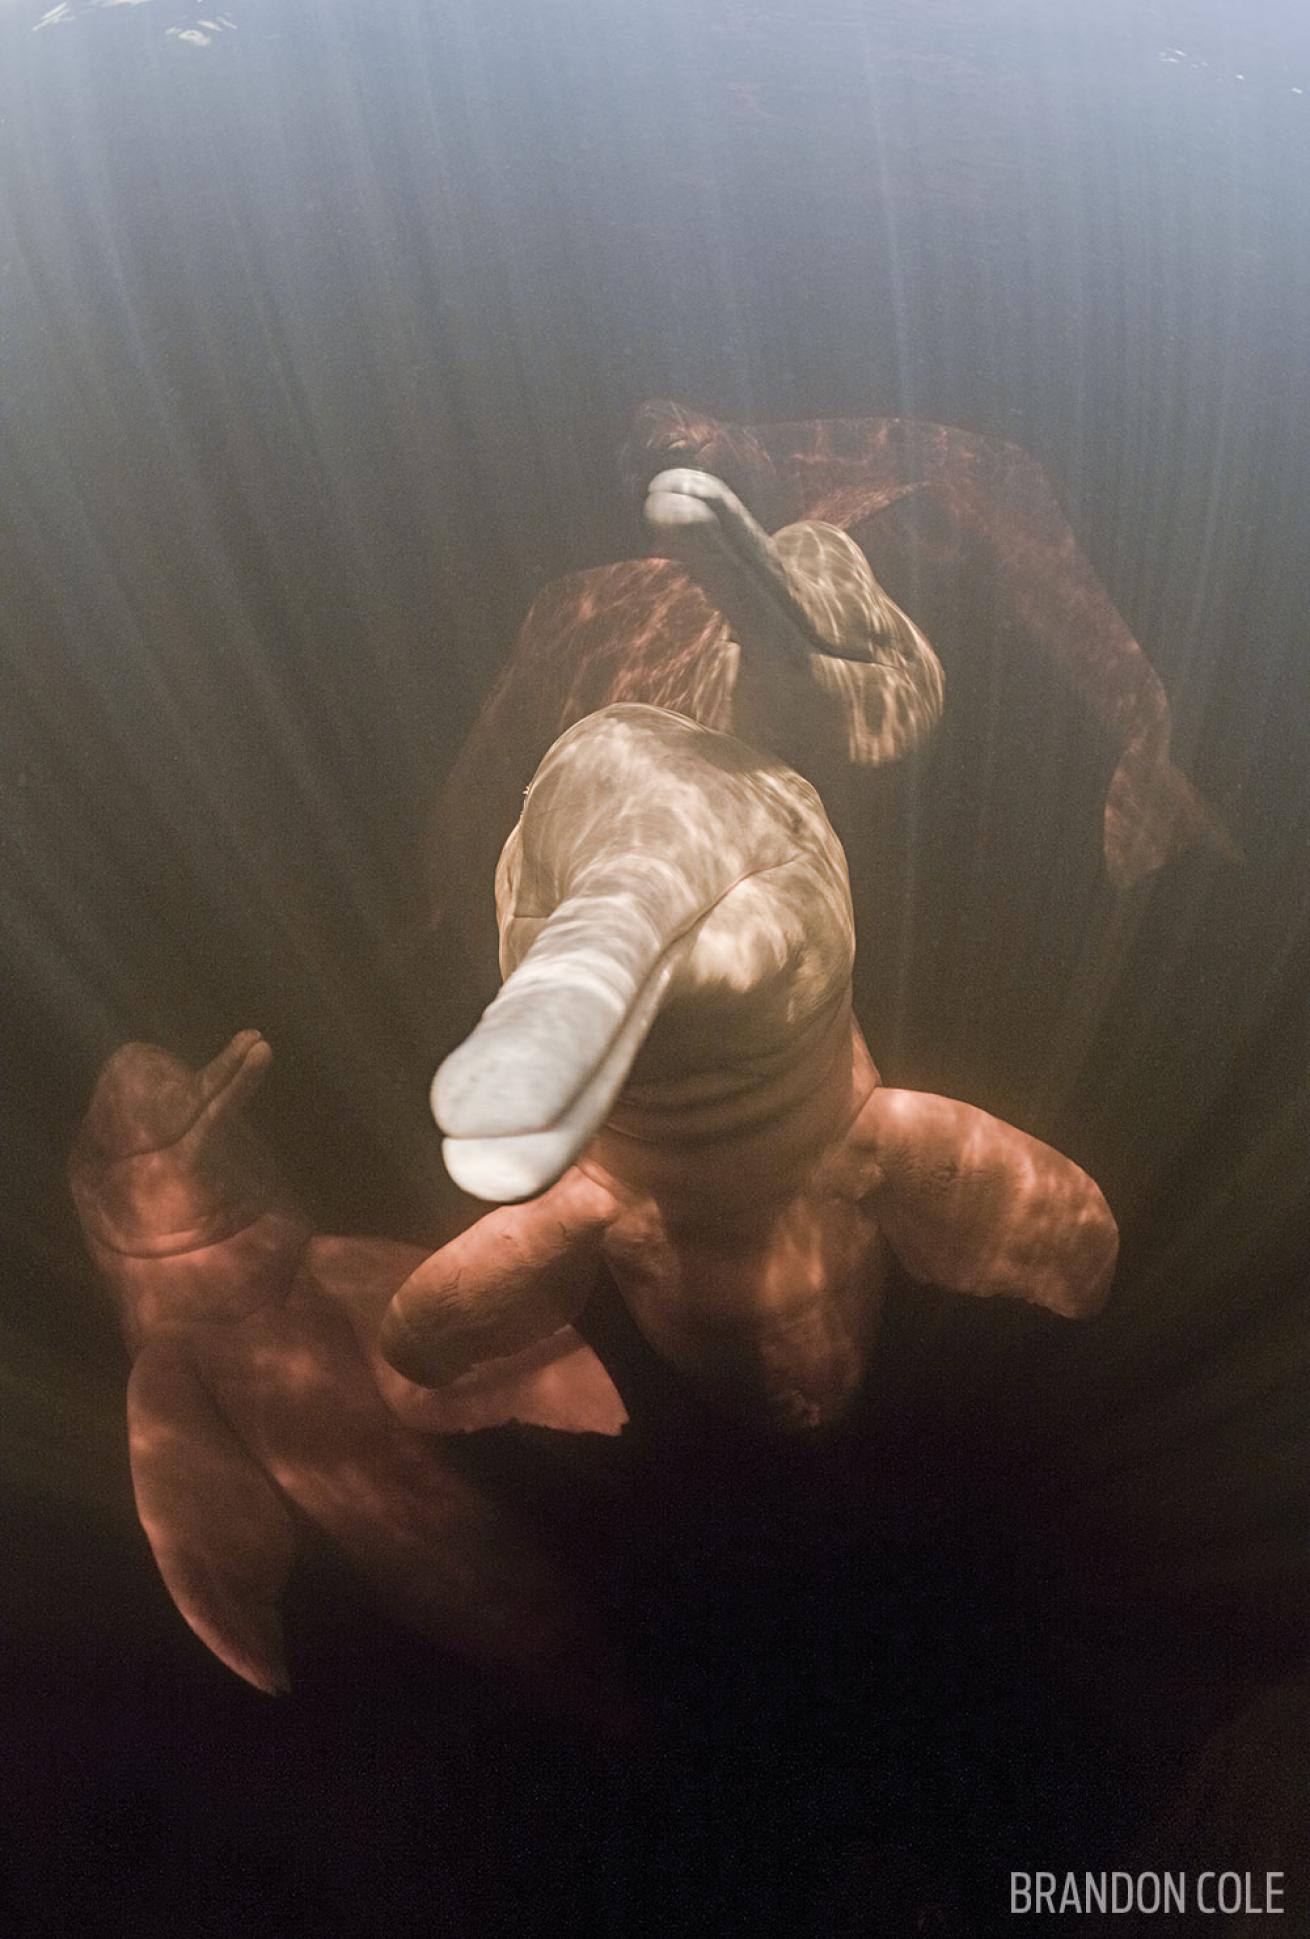 Pink Amazon River Dolphins Underwater in Brazil